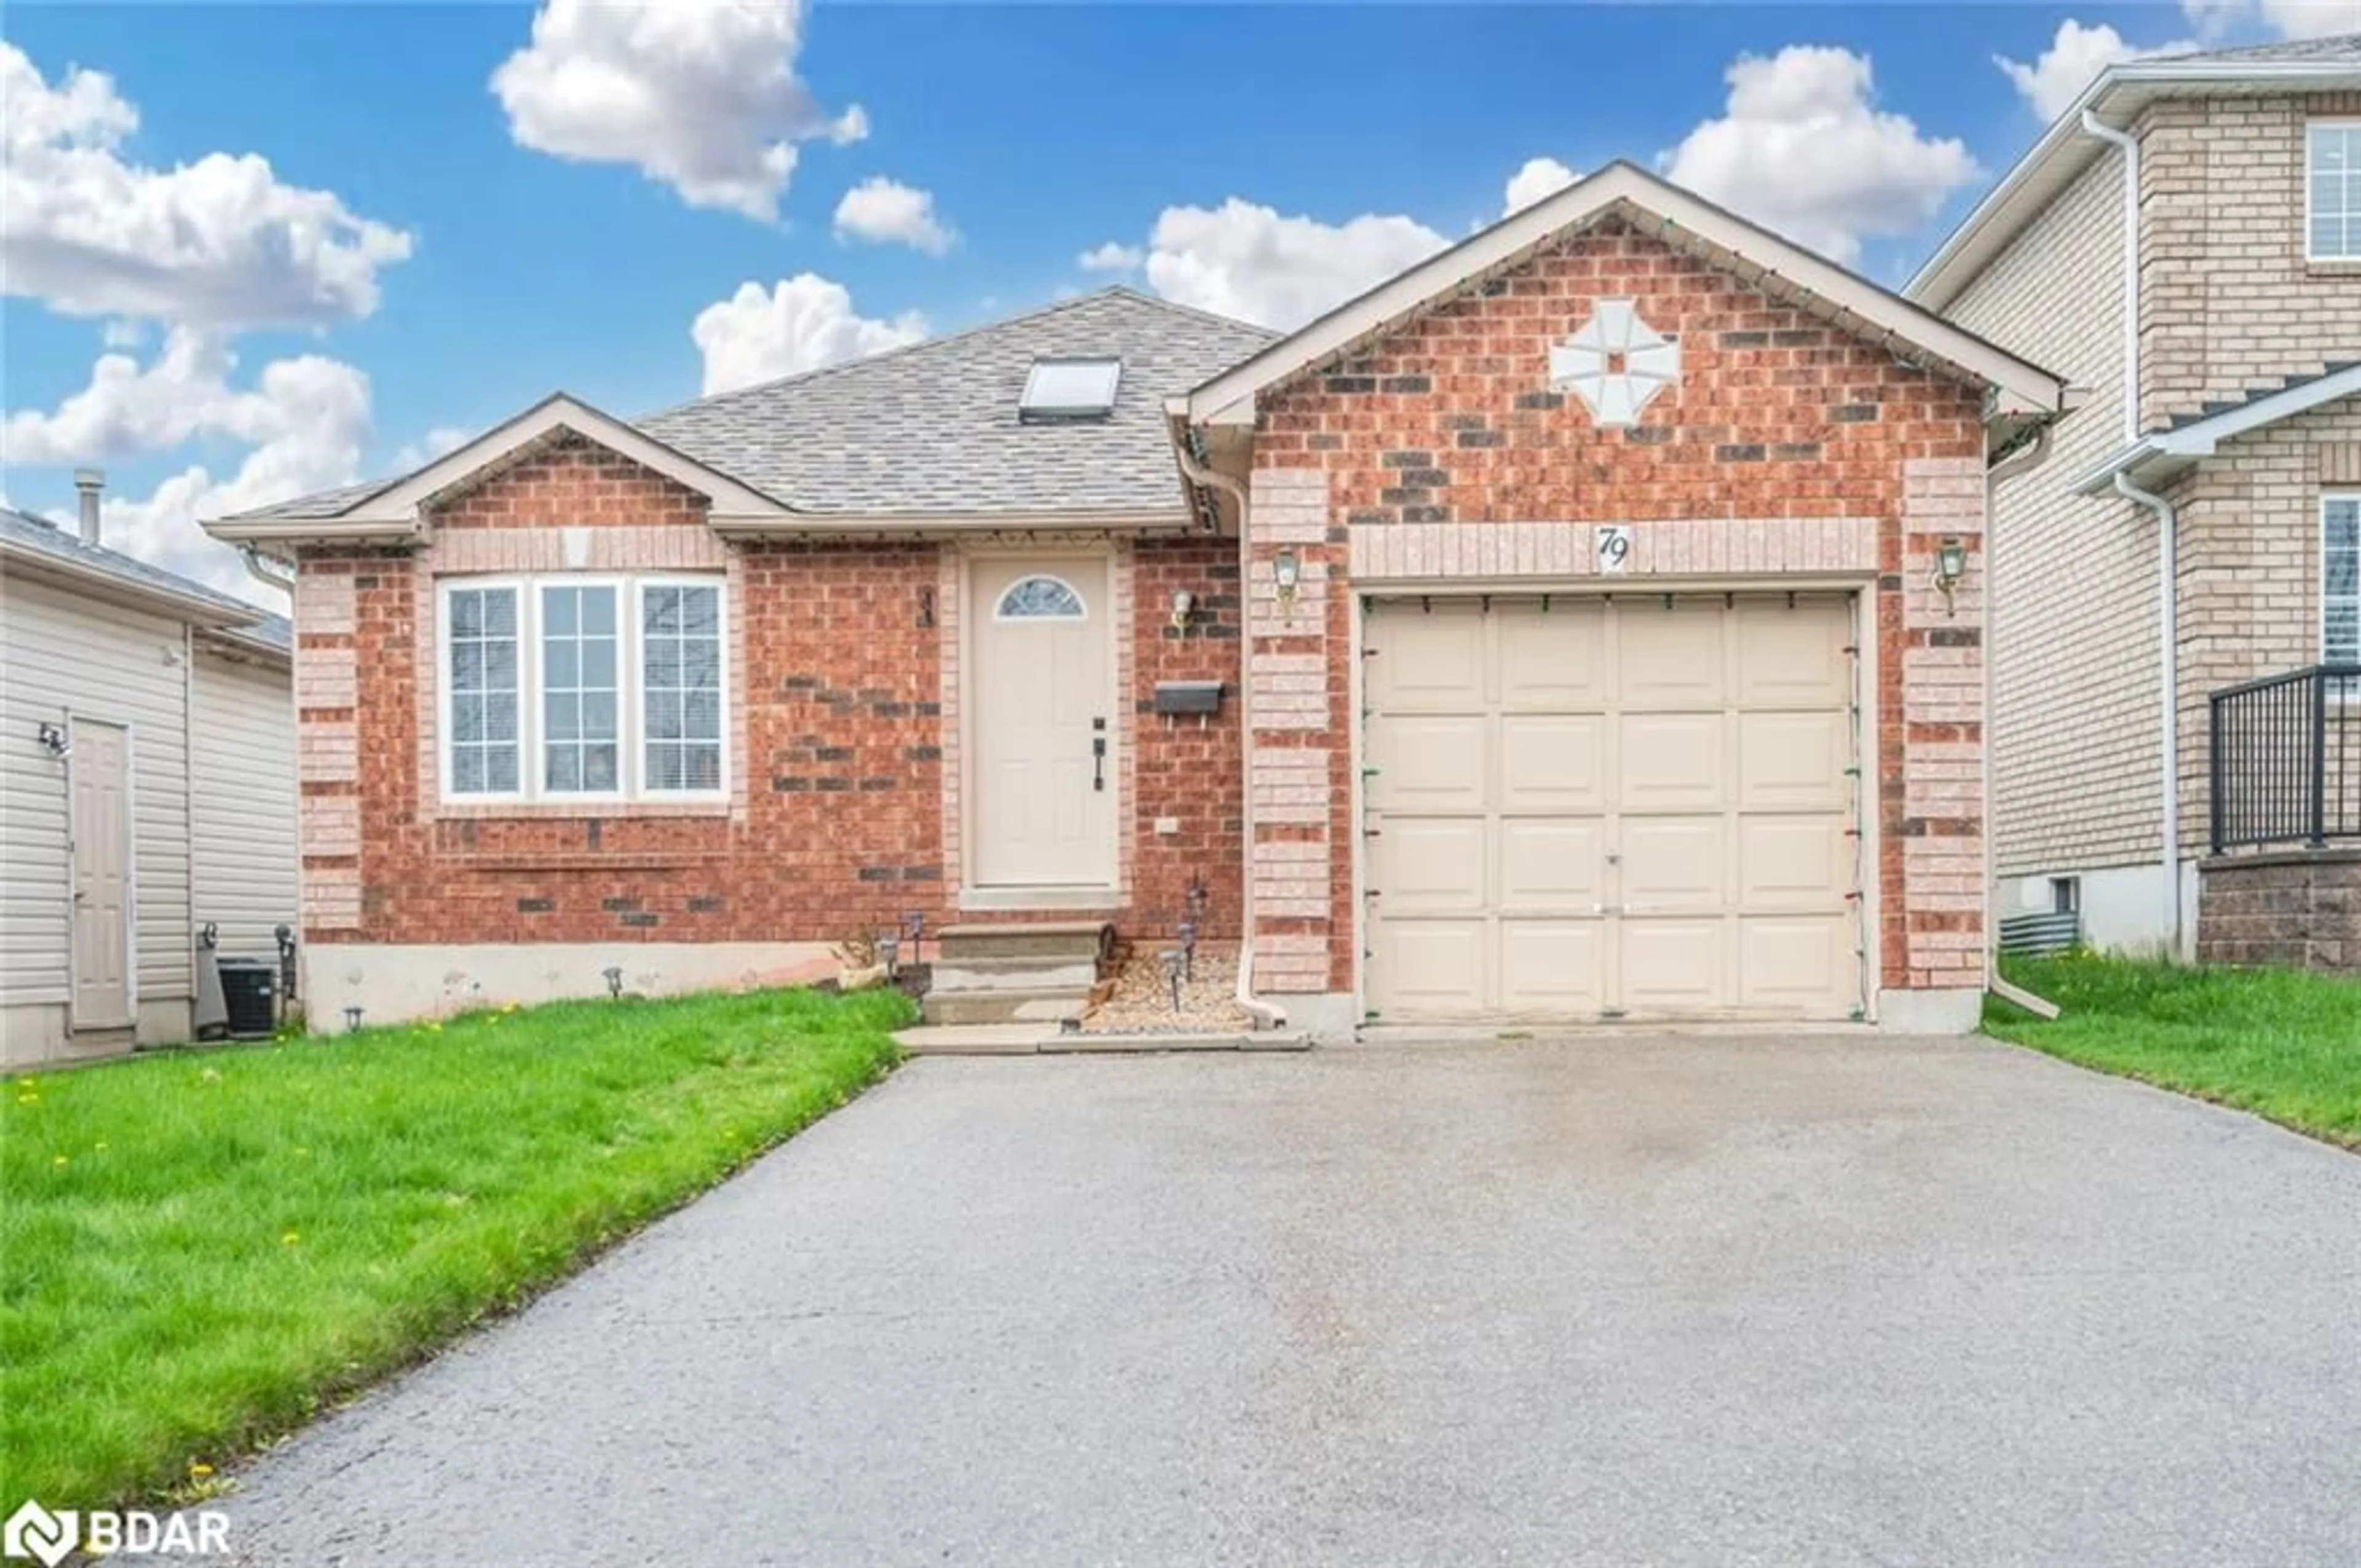 Home with brick exterior material for 79 Ambler Bay, Barrie Ontario L4M 7A6